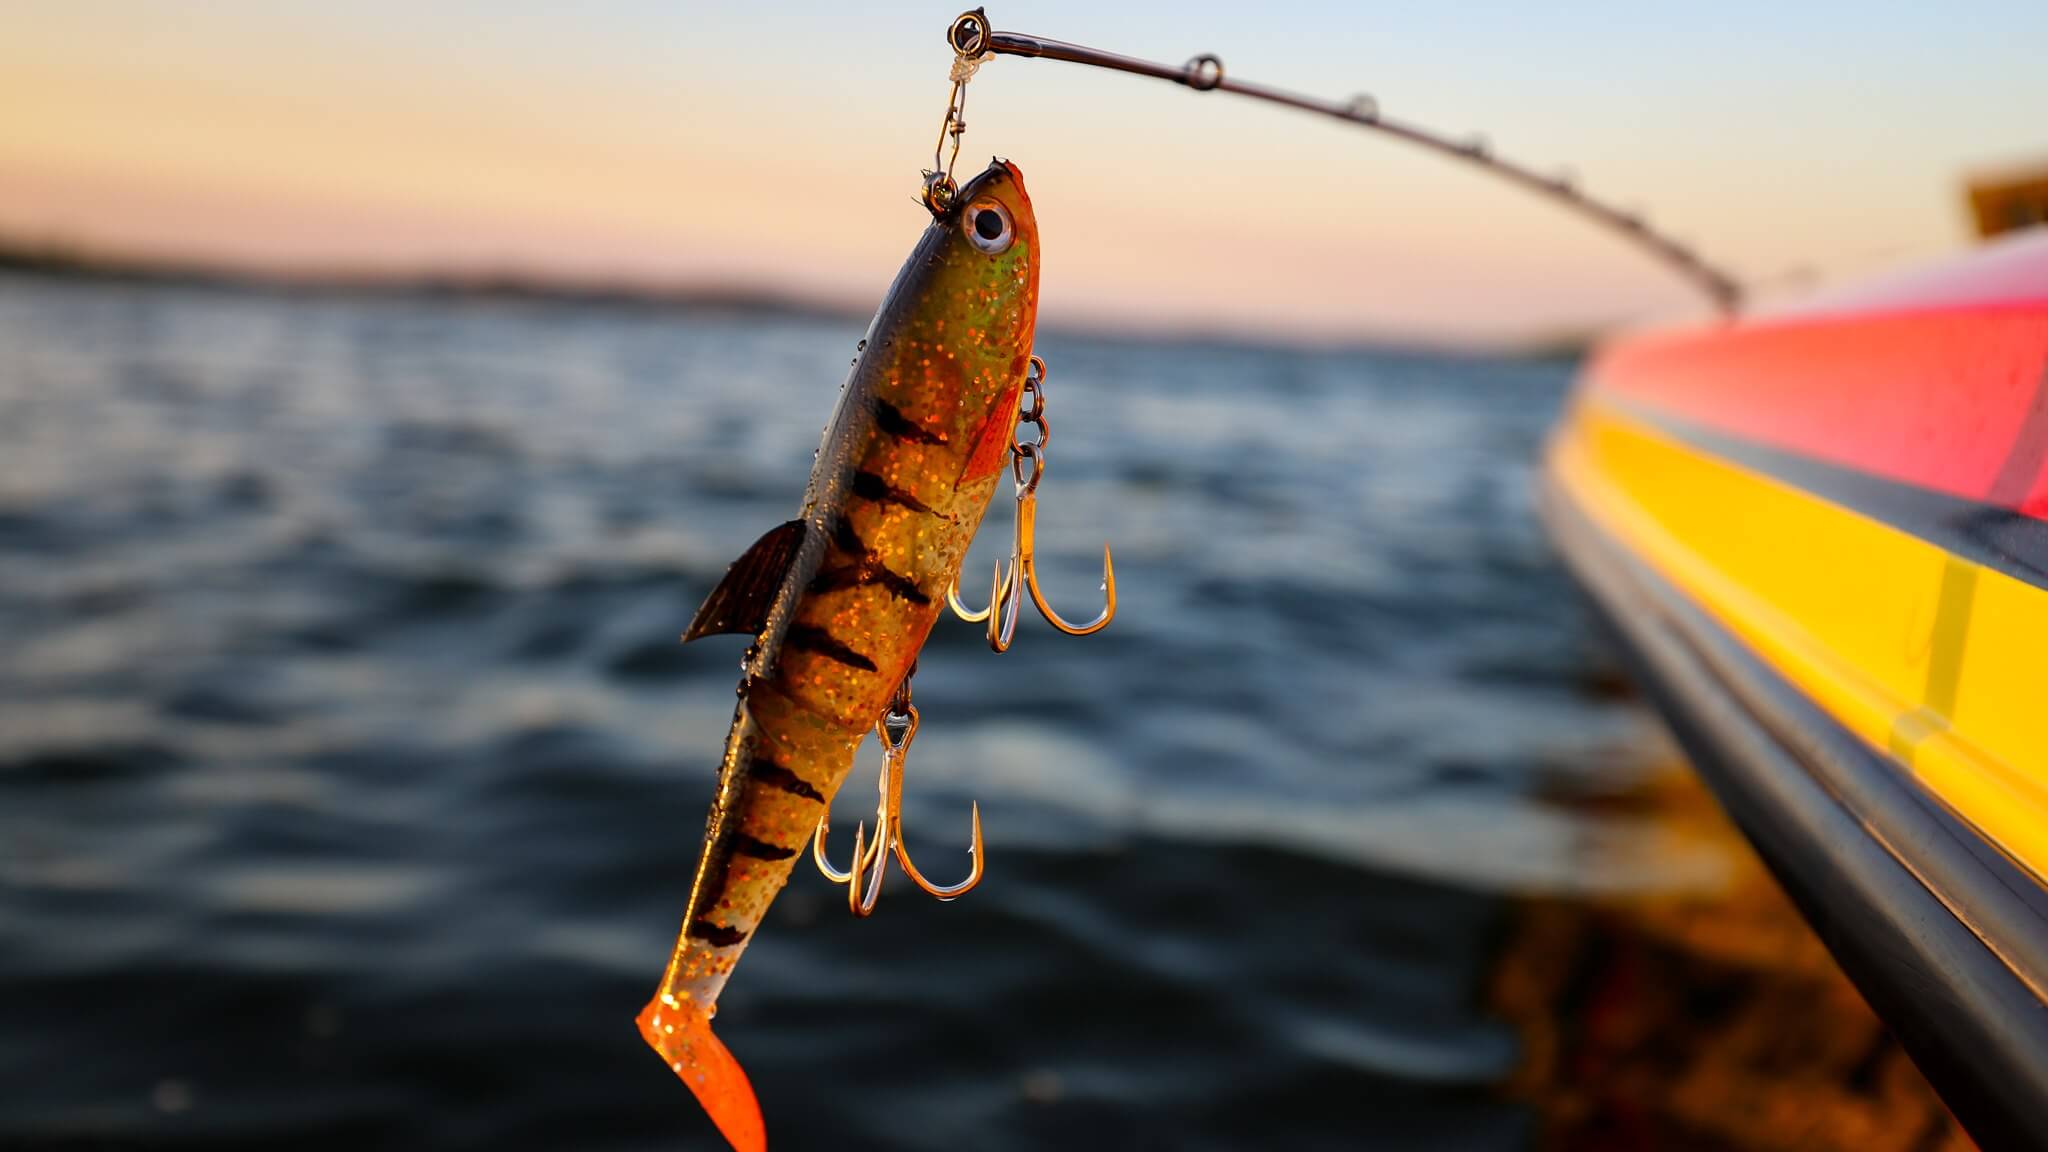 STOP LOSING FISH! How to Change the Treble Hooks on Your Lures